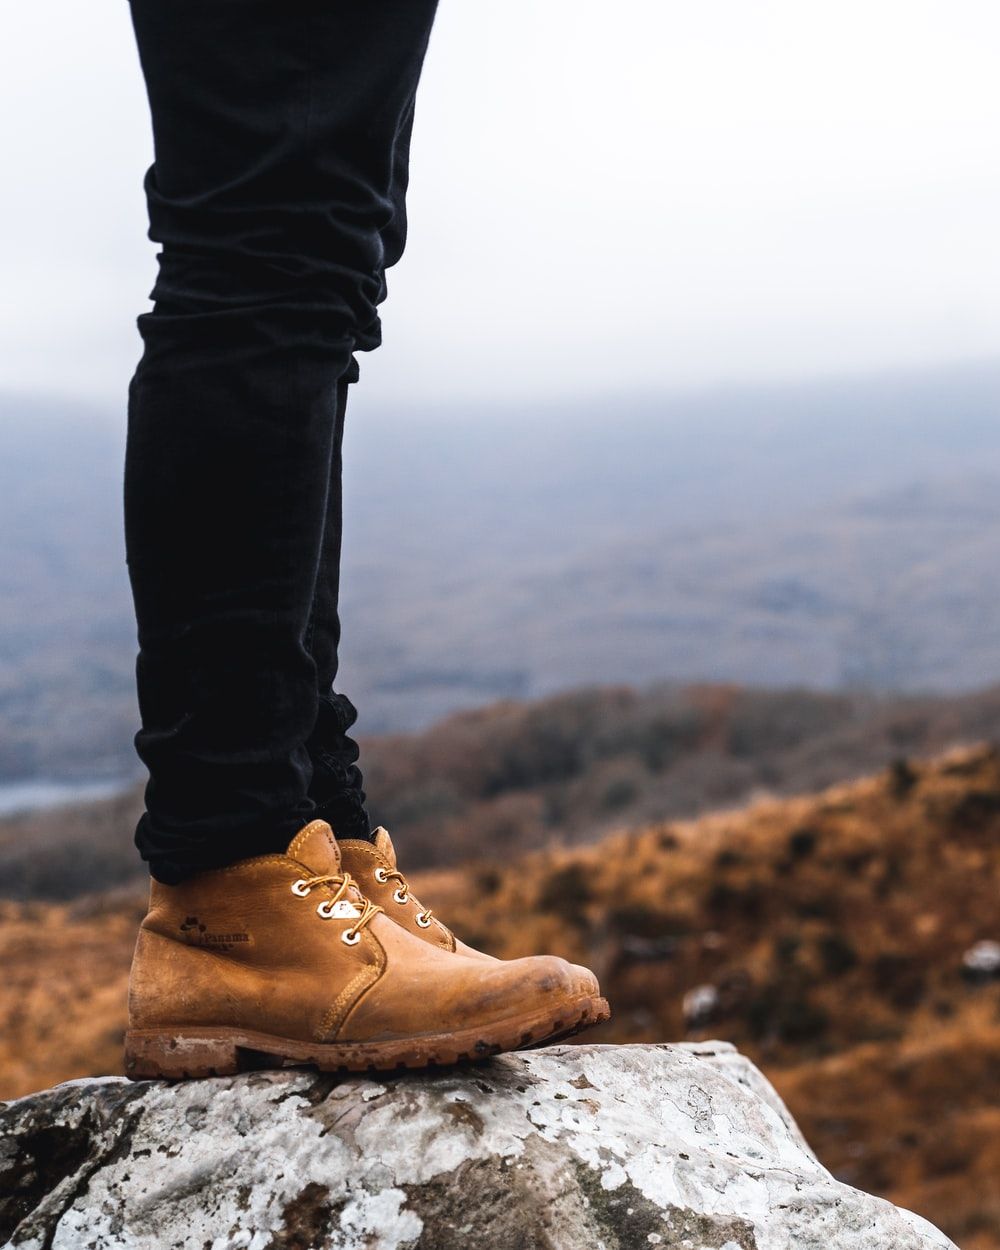 Hiking Boots Picture. Download Free Image